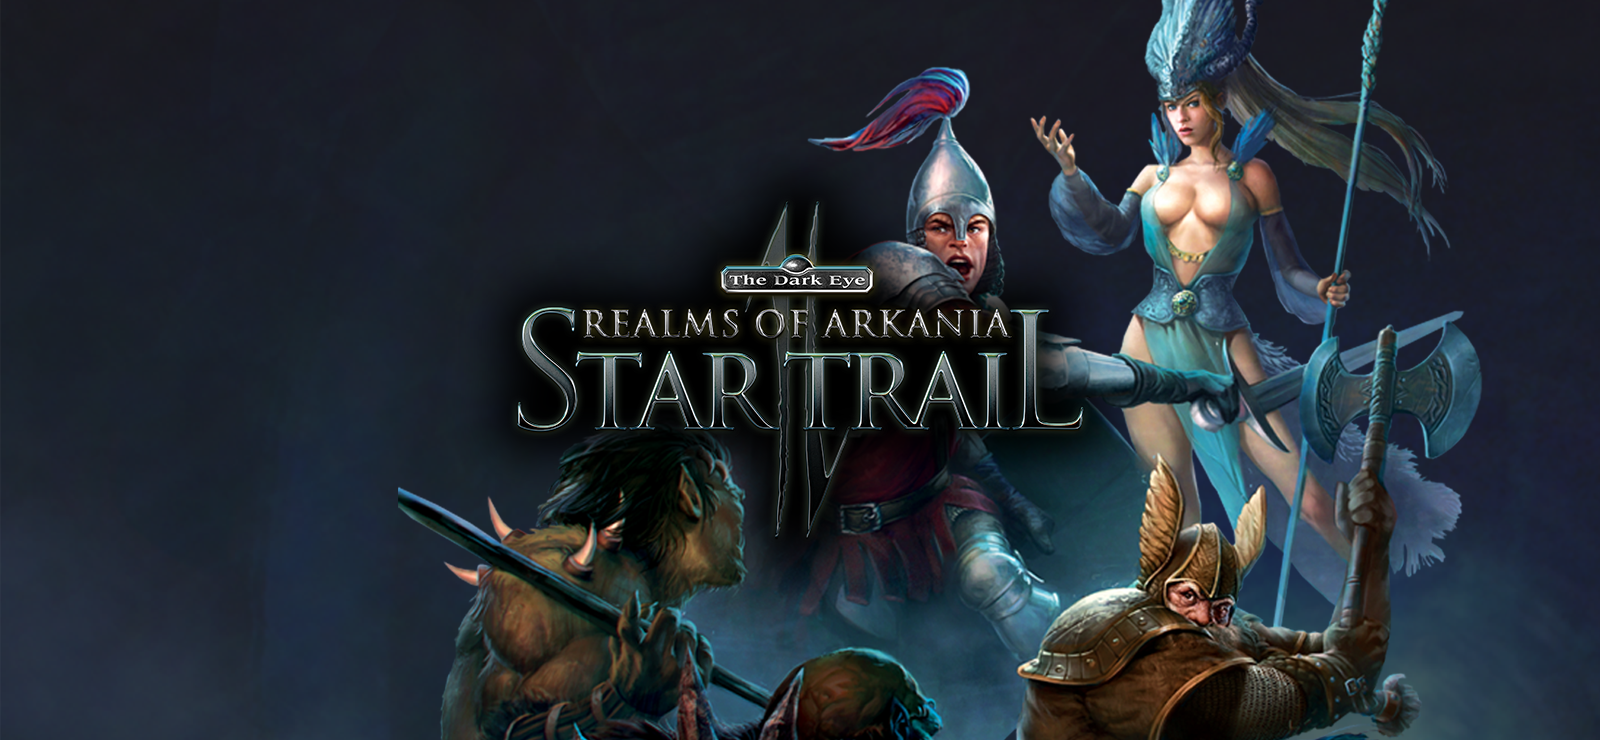 Realms Of Arkania: Star Trail - Digital Deluxe Edition